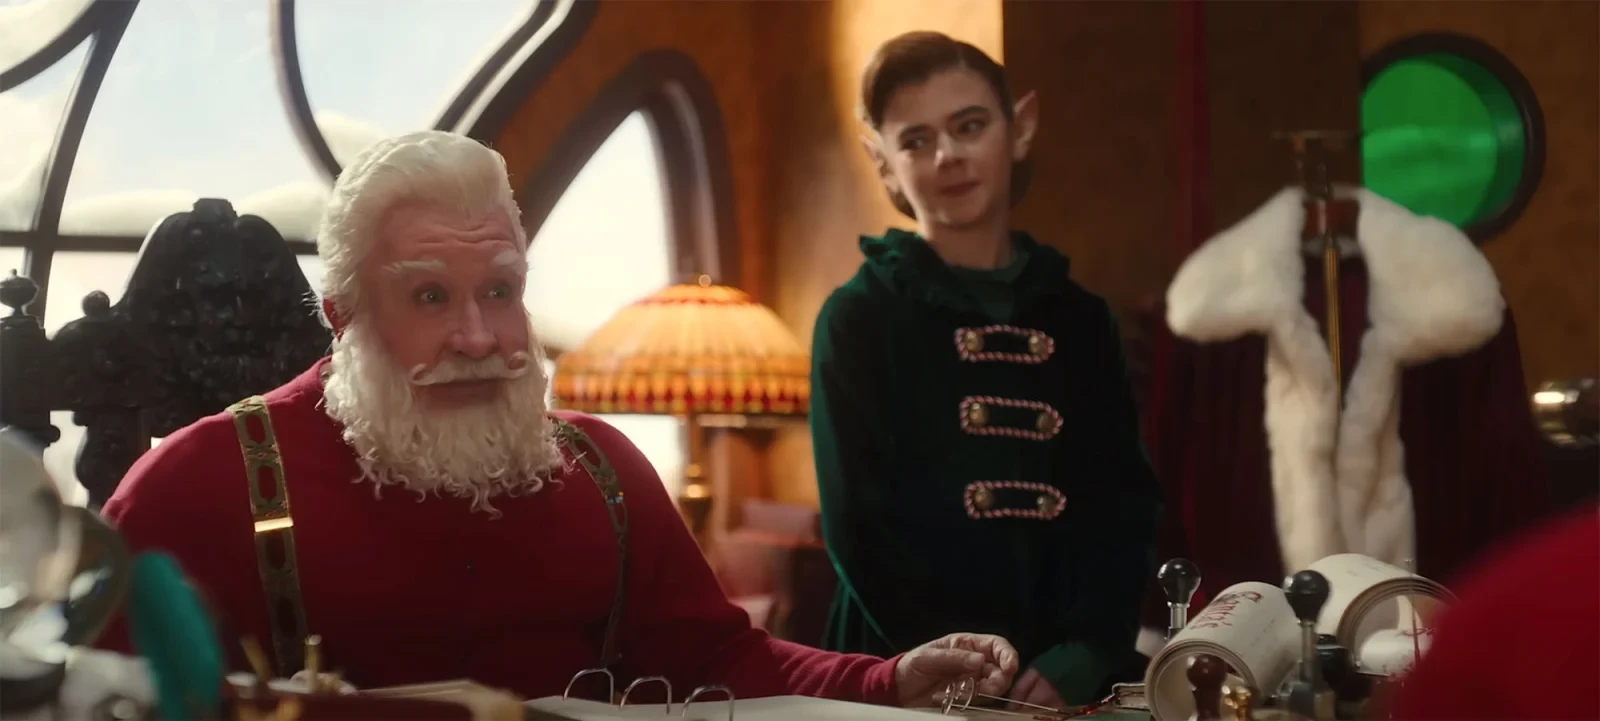 A scene from The Santa Clauses trailer